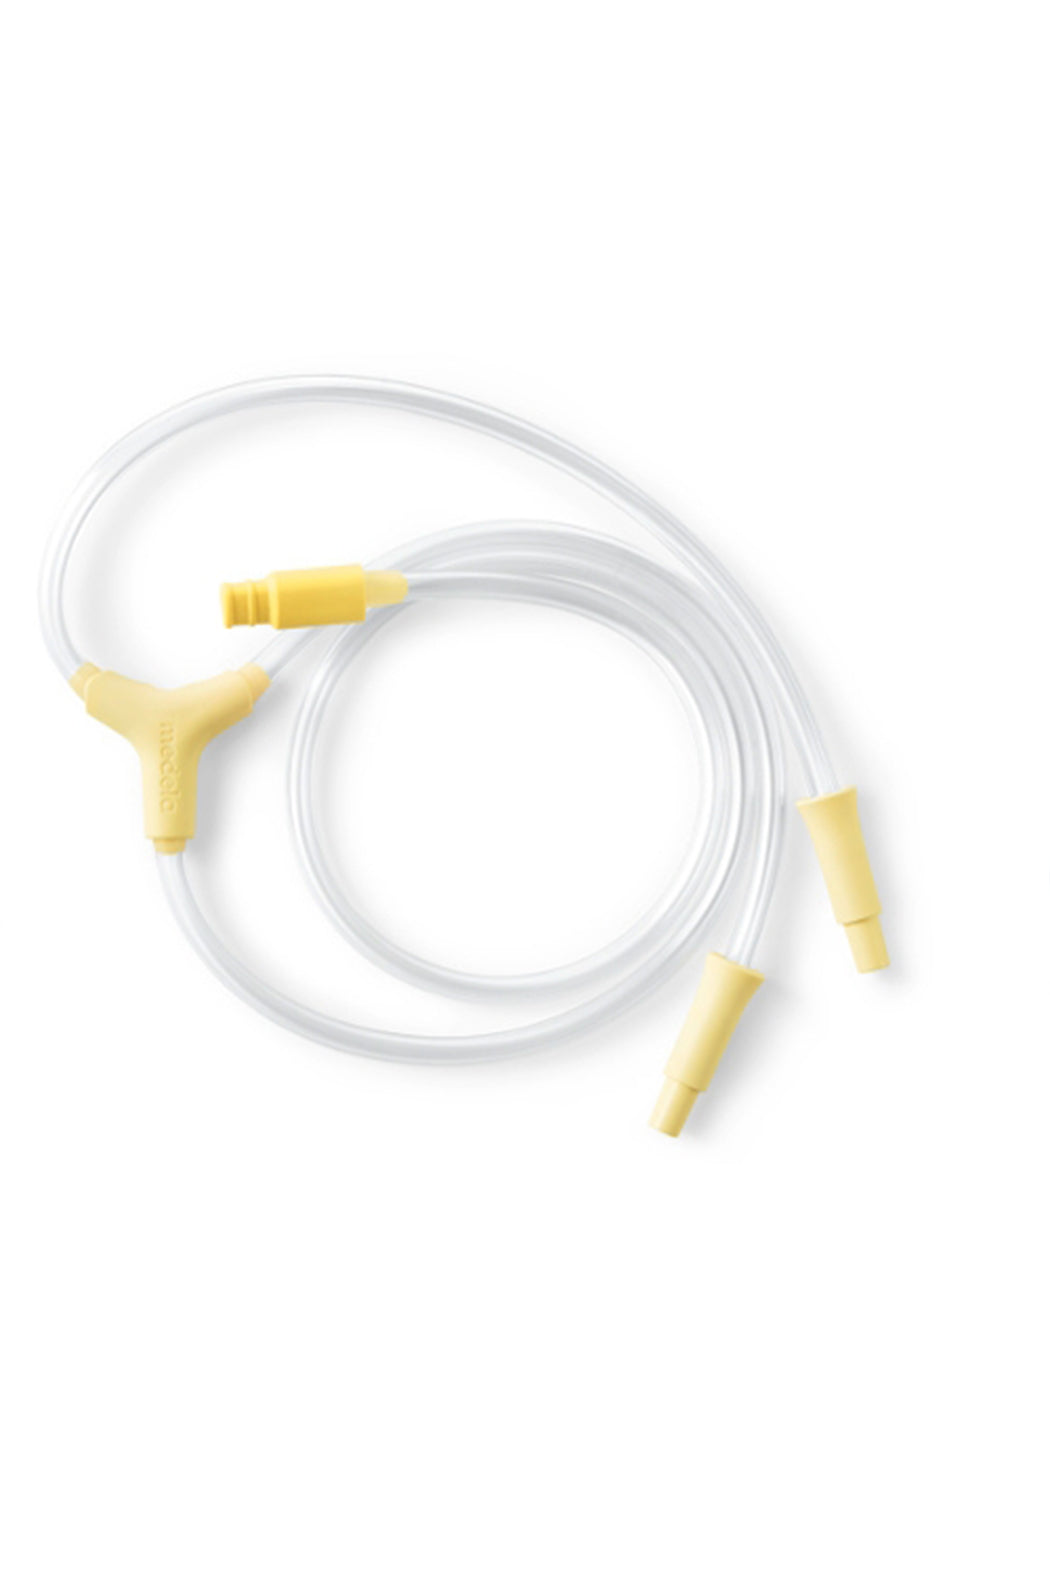 Medela Freestyle Flex™ and Swing Maxi™ Breast Pump Replacement Tubing